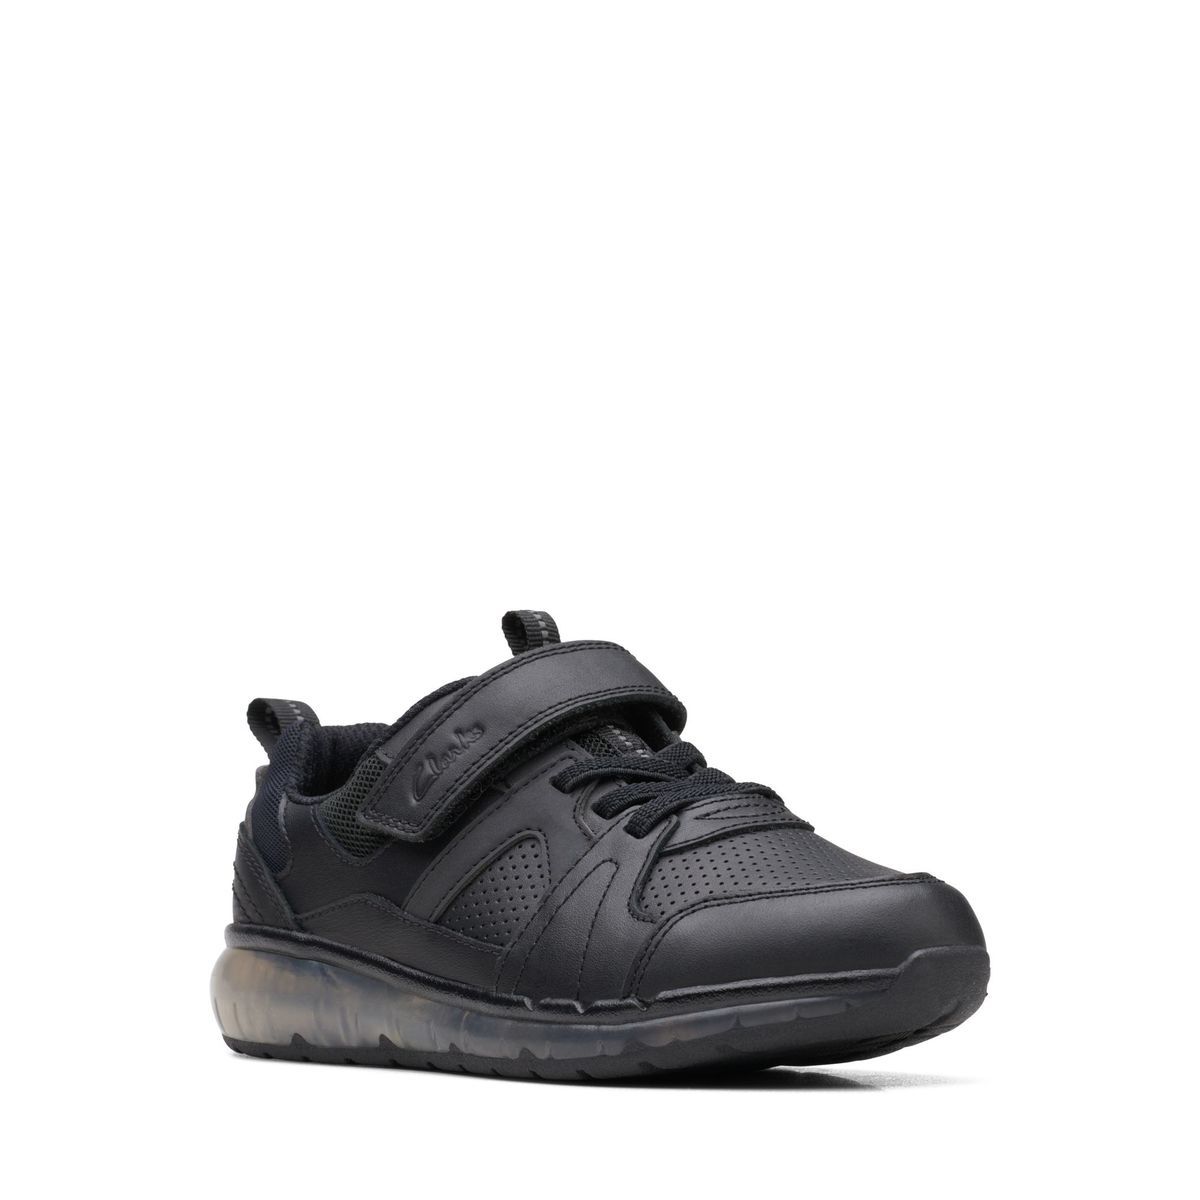 Clarks Spark Beam K Black Leather Kids Boys Trainers 679226F In Size 11.5 In Plain Black Leather F Width Fitting Regular Fit For School For kids